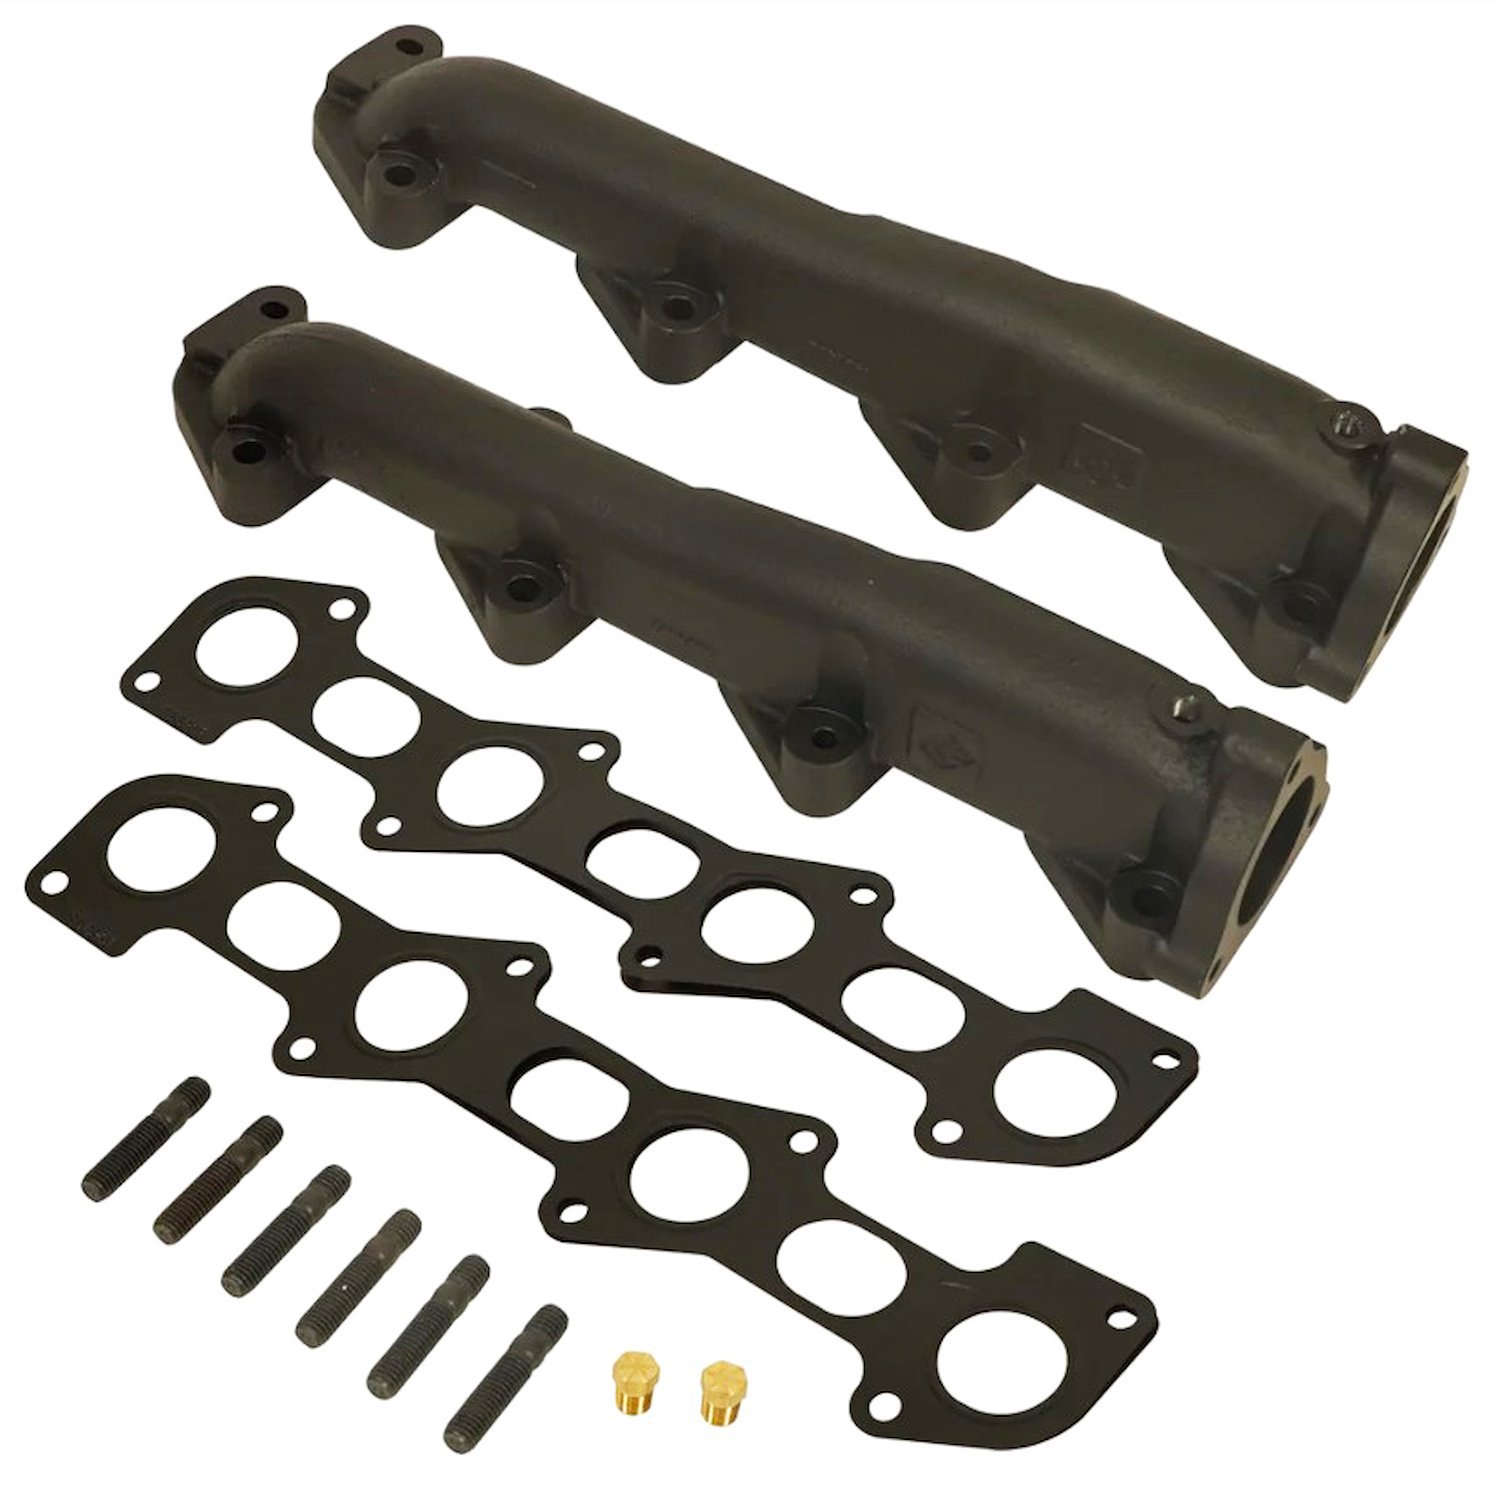 Exhaust Manifold Kit for 2008-2010 Ford 6.4L Power Stroke